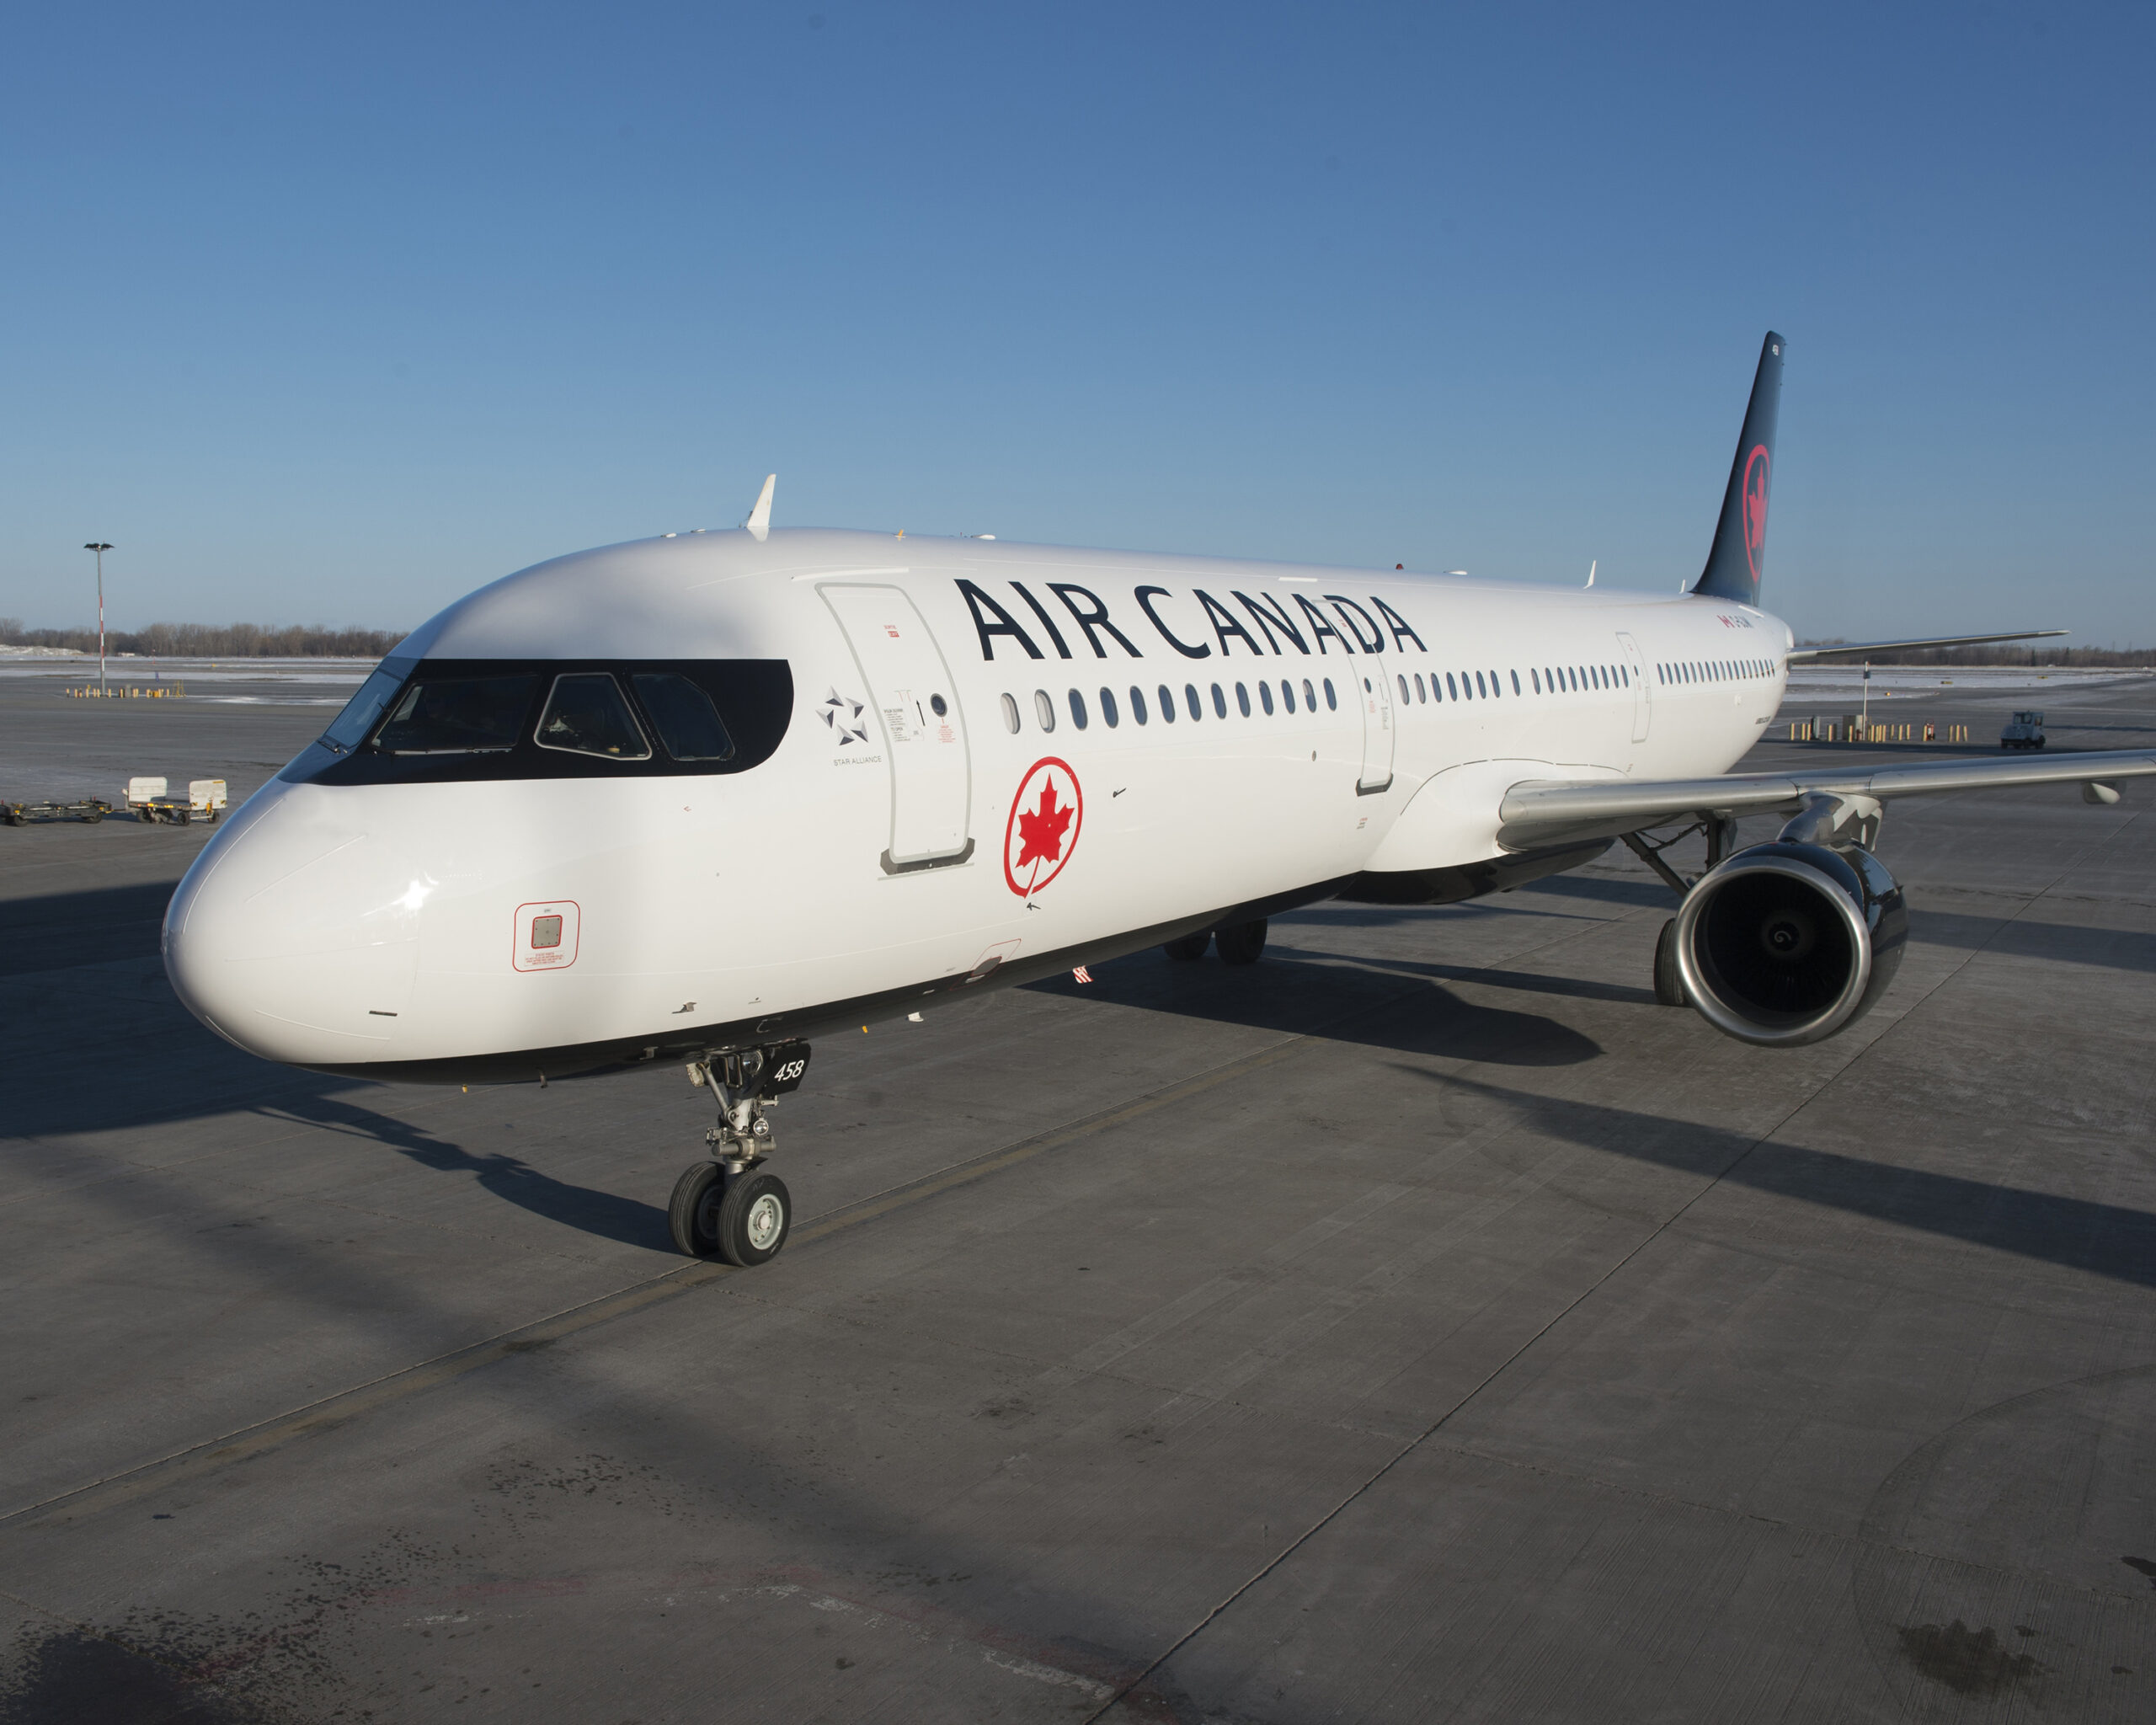 Air Canada In-flight Entertainment and Connectivity